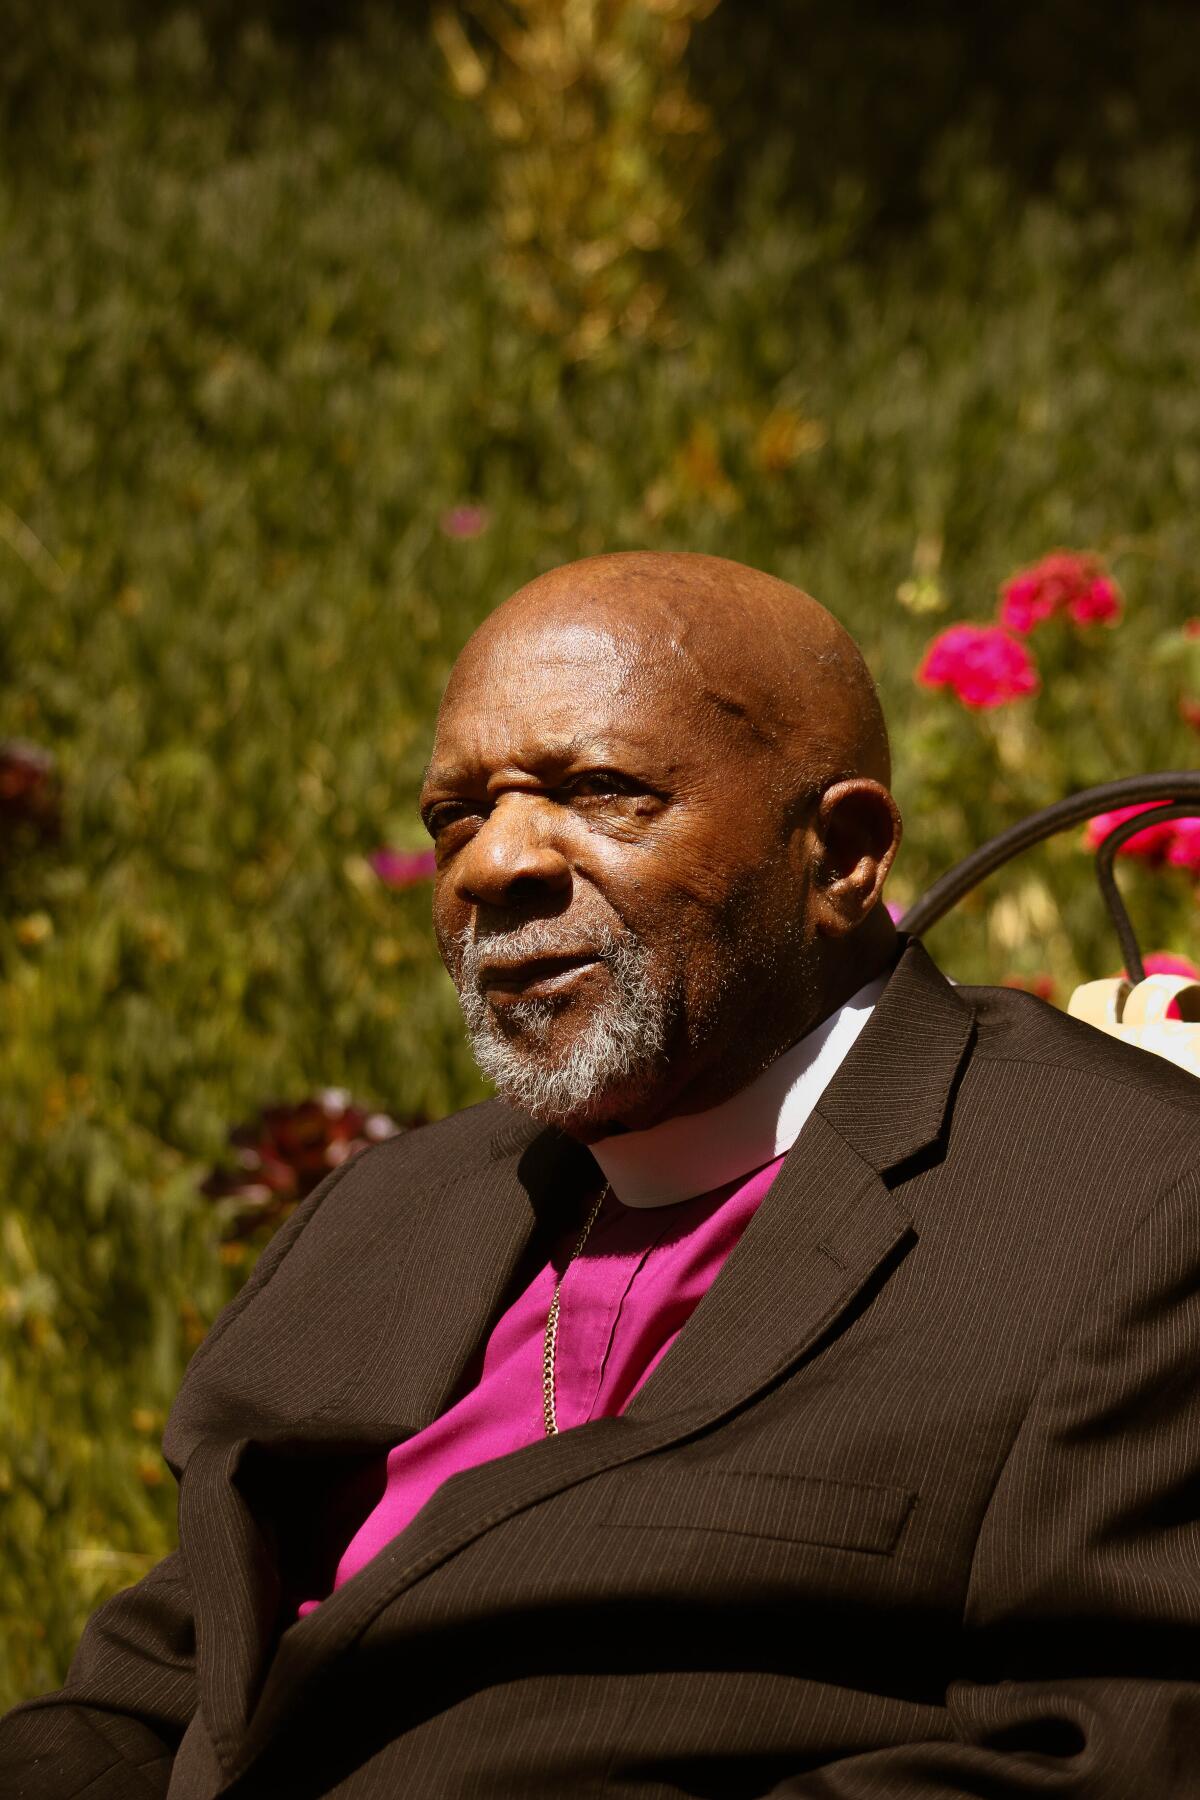 Bishop George McKinney poses for a portrait on June 3, 2020 in Chula Vista, California.